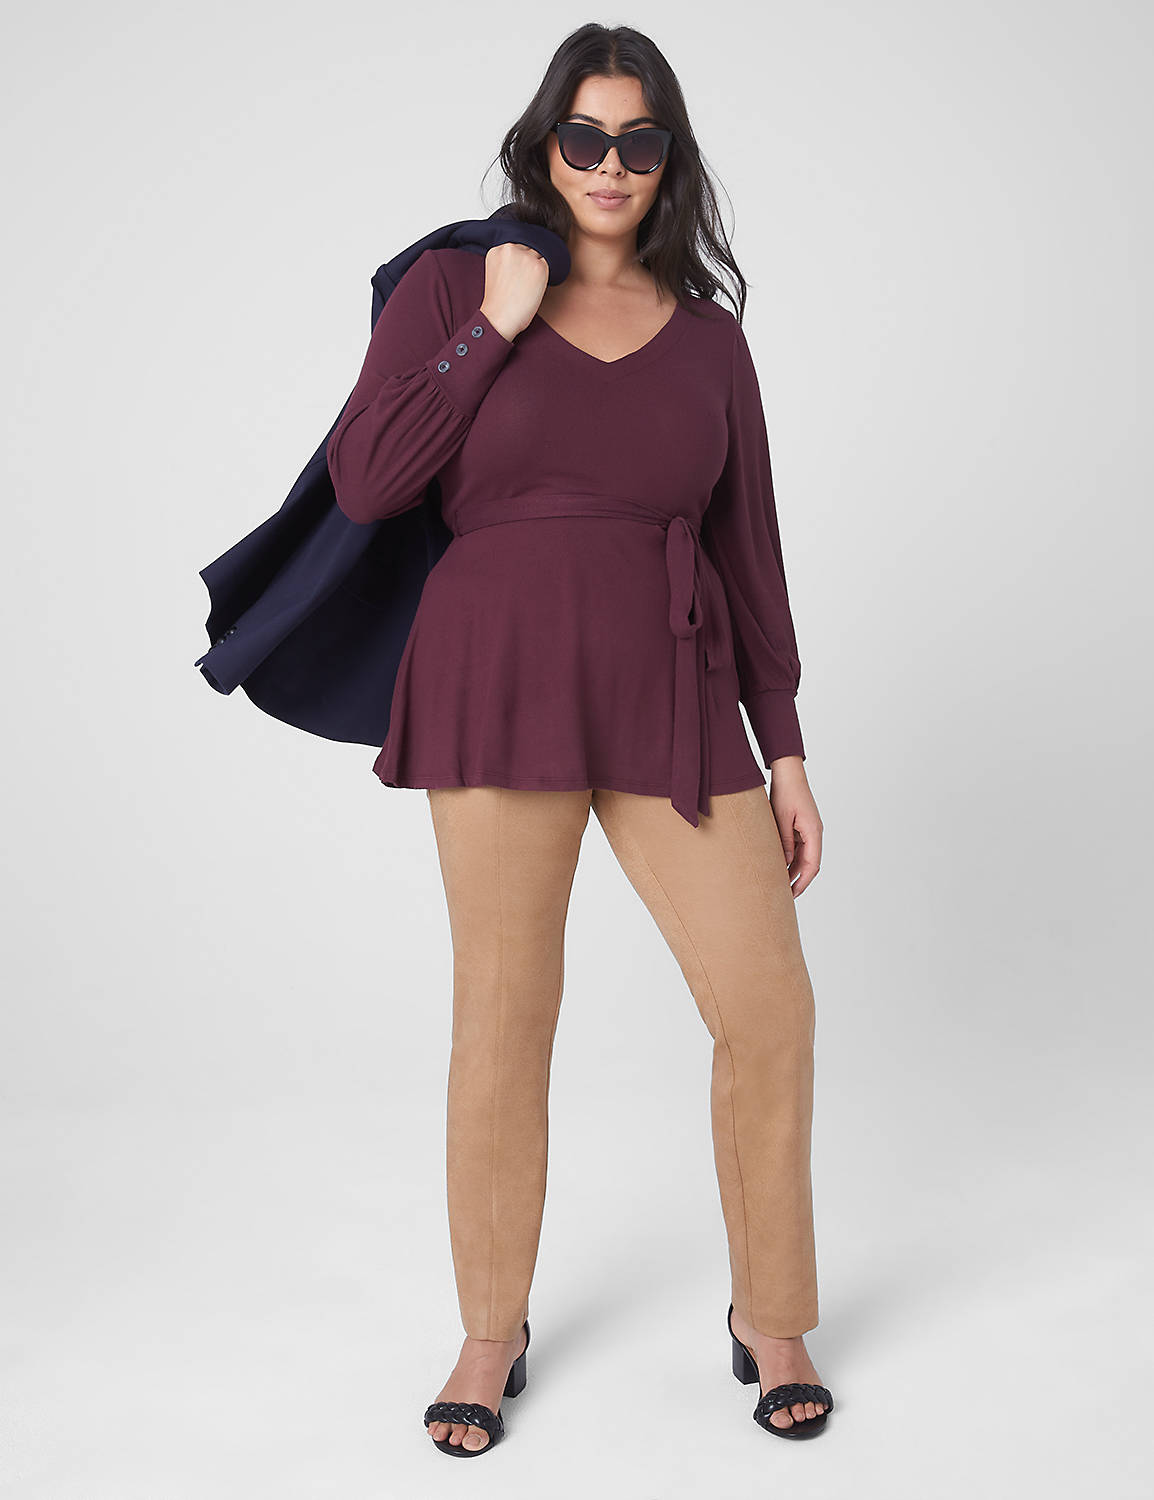 Long Sleeve V-Neck Tunic In Hacci 1 Product Image 3